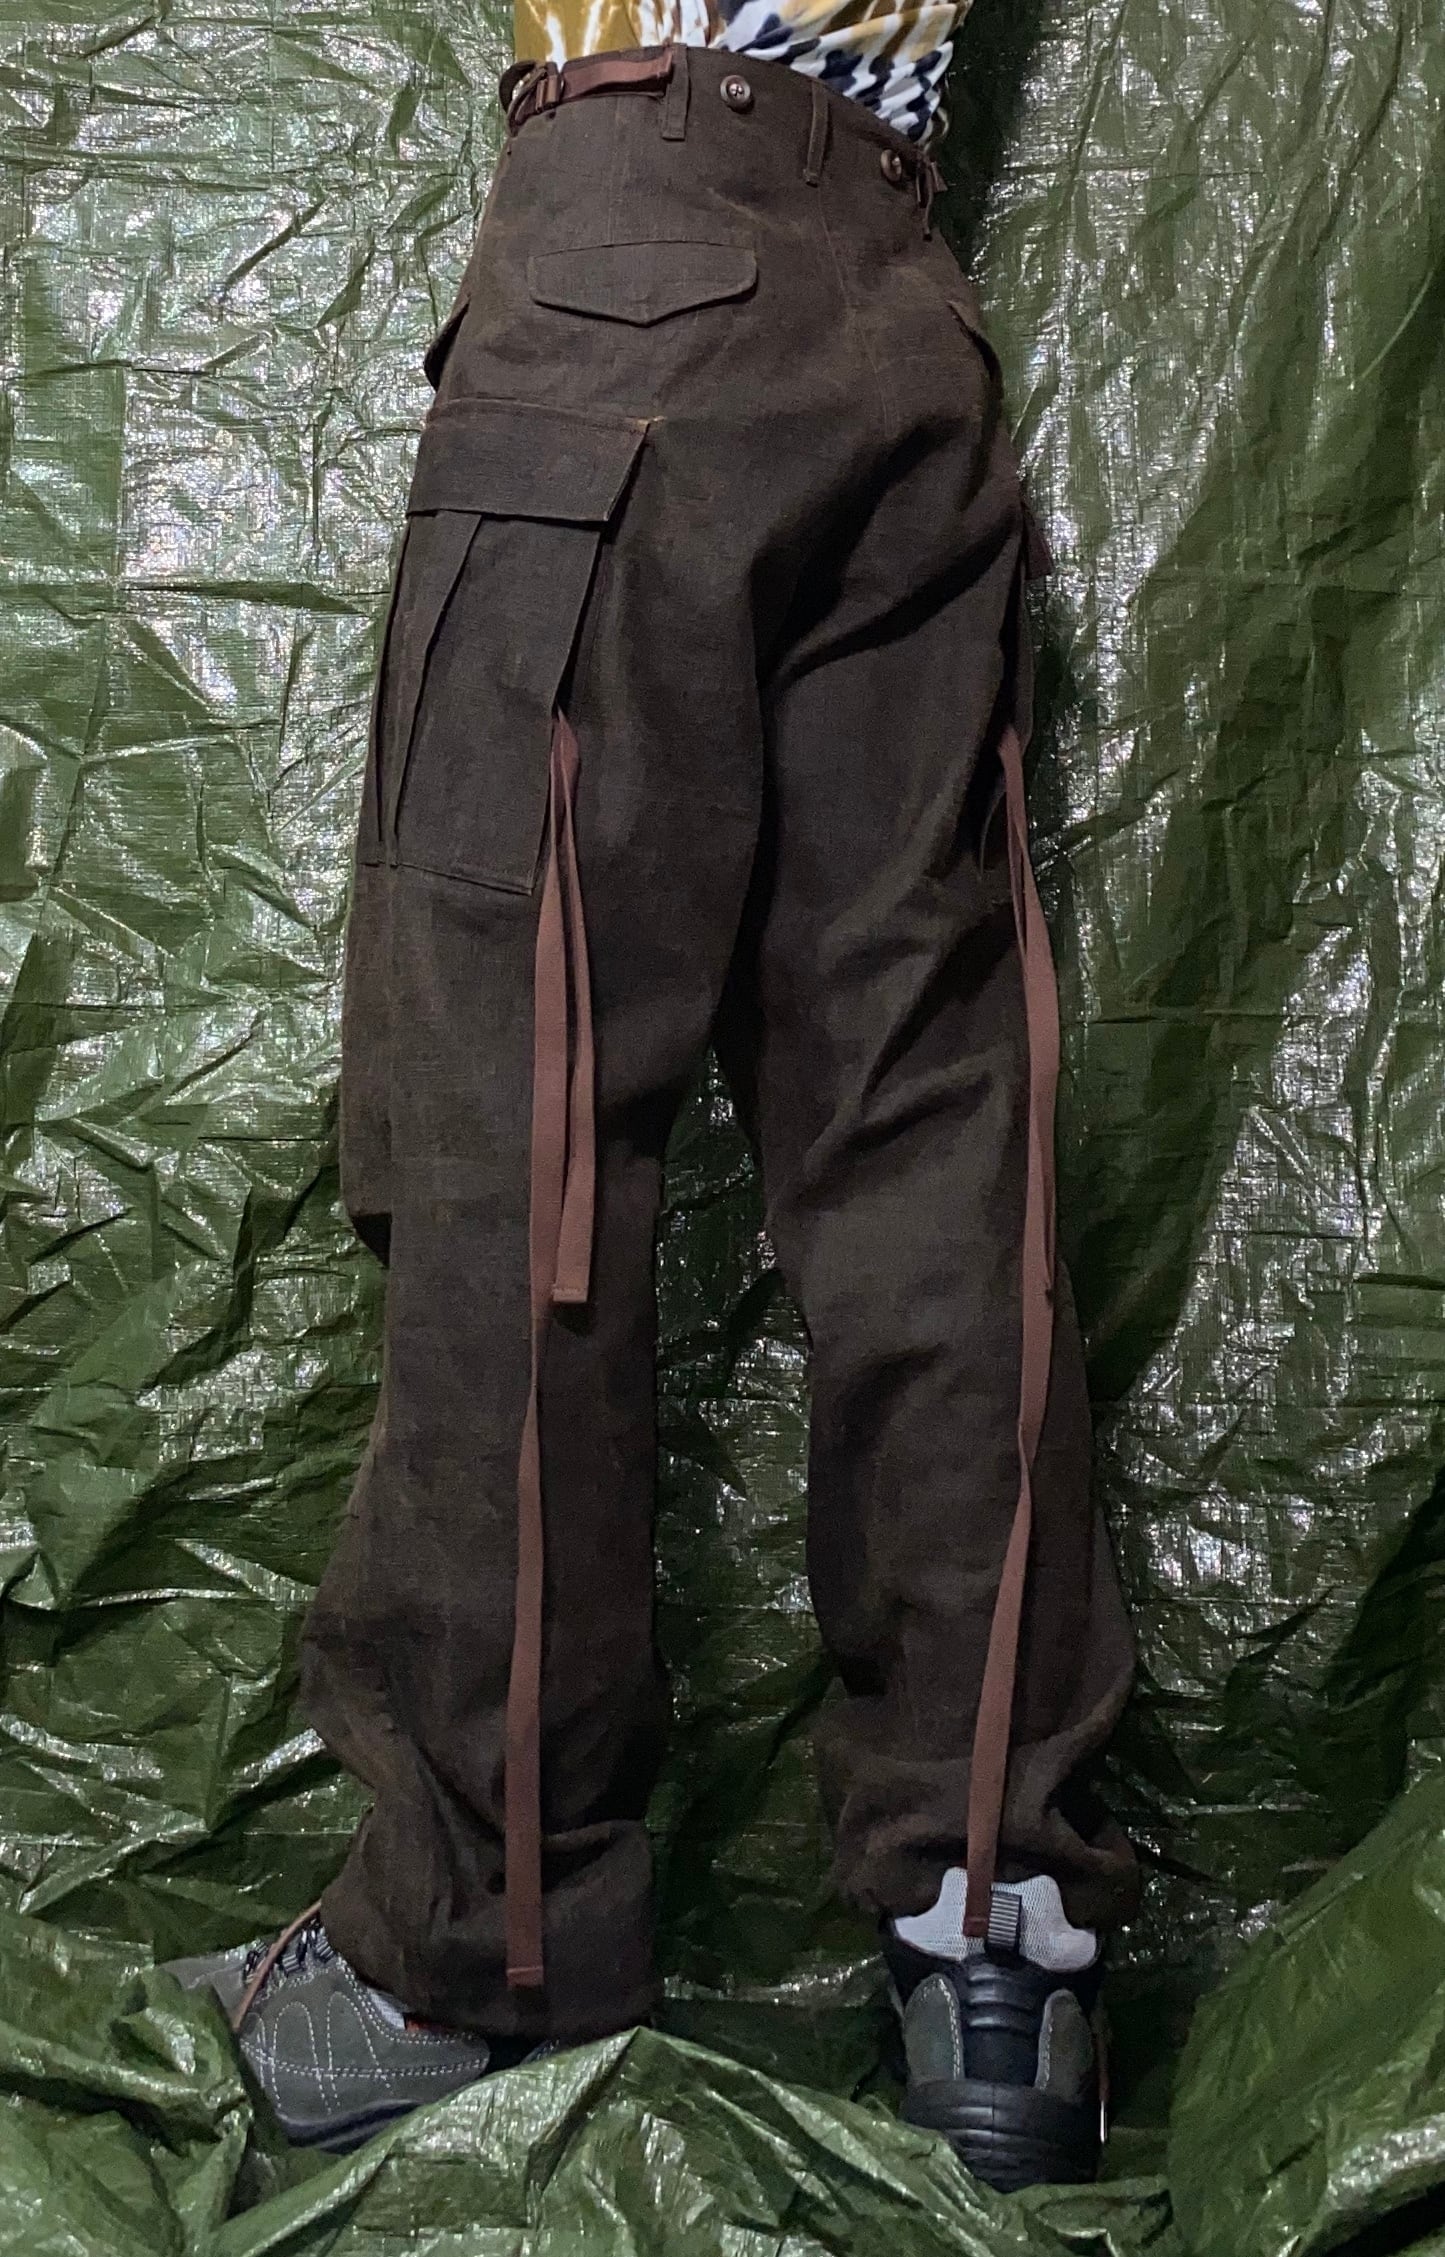 BEAUGAN MUD DYED CARGO TROUSERS  M-65